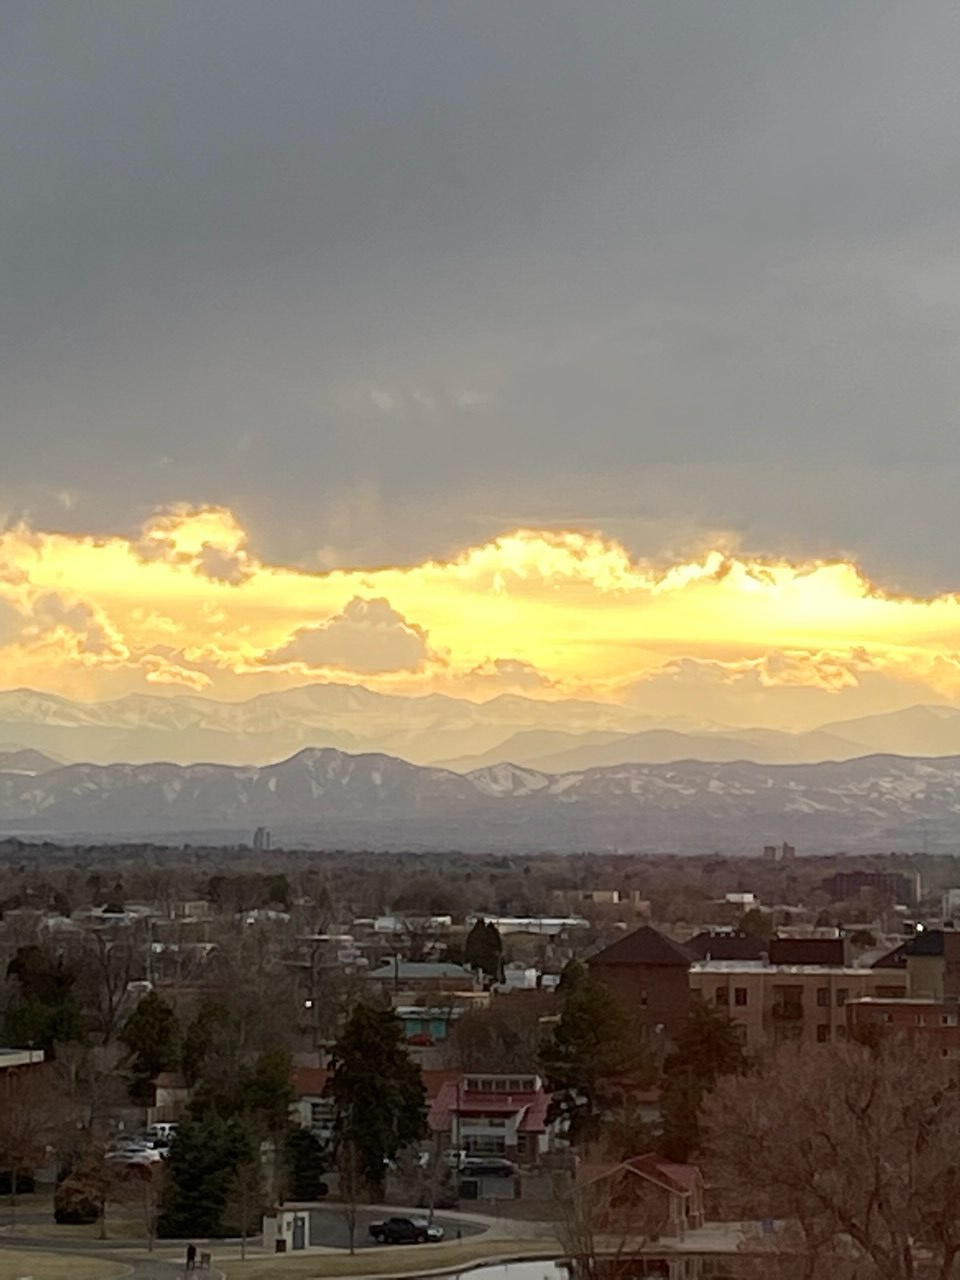 Miki took this photo from her room at Anschutz.  She loved this view. She SO loved the precious Rocky Mountains and the views of them as we drove from somewhere back to Boulder as the flatirons would come into view.
